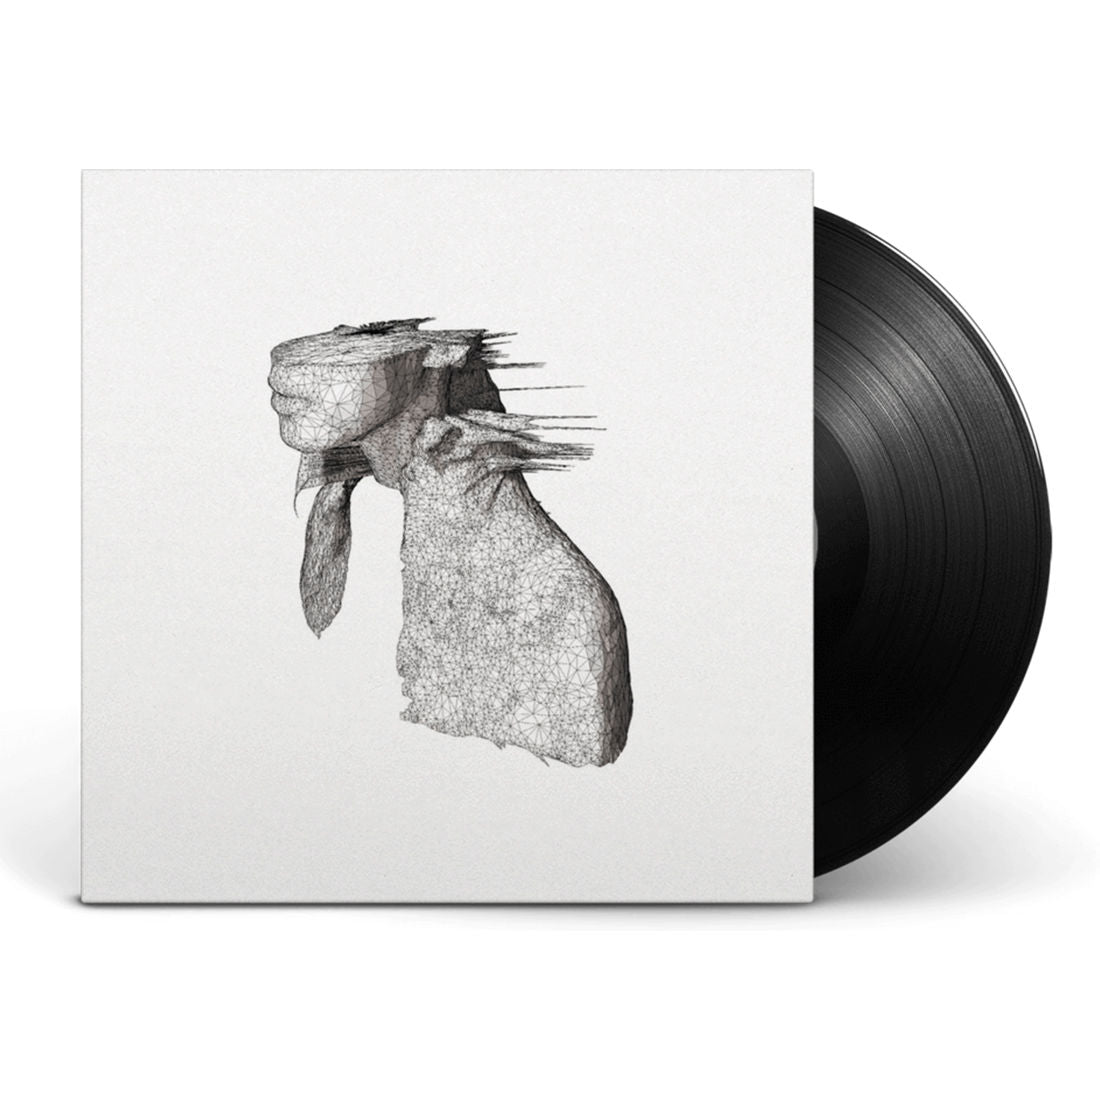 Coldplay - A Rush Of Blood To The Head: Vinyl LP